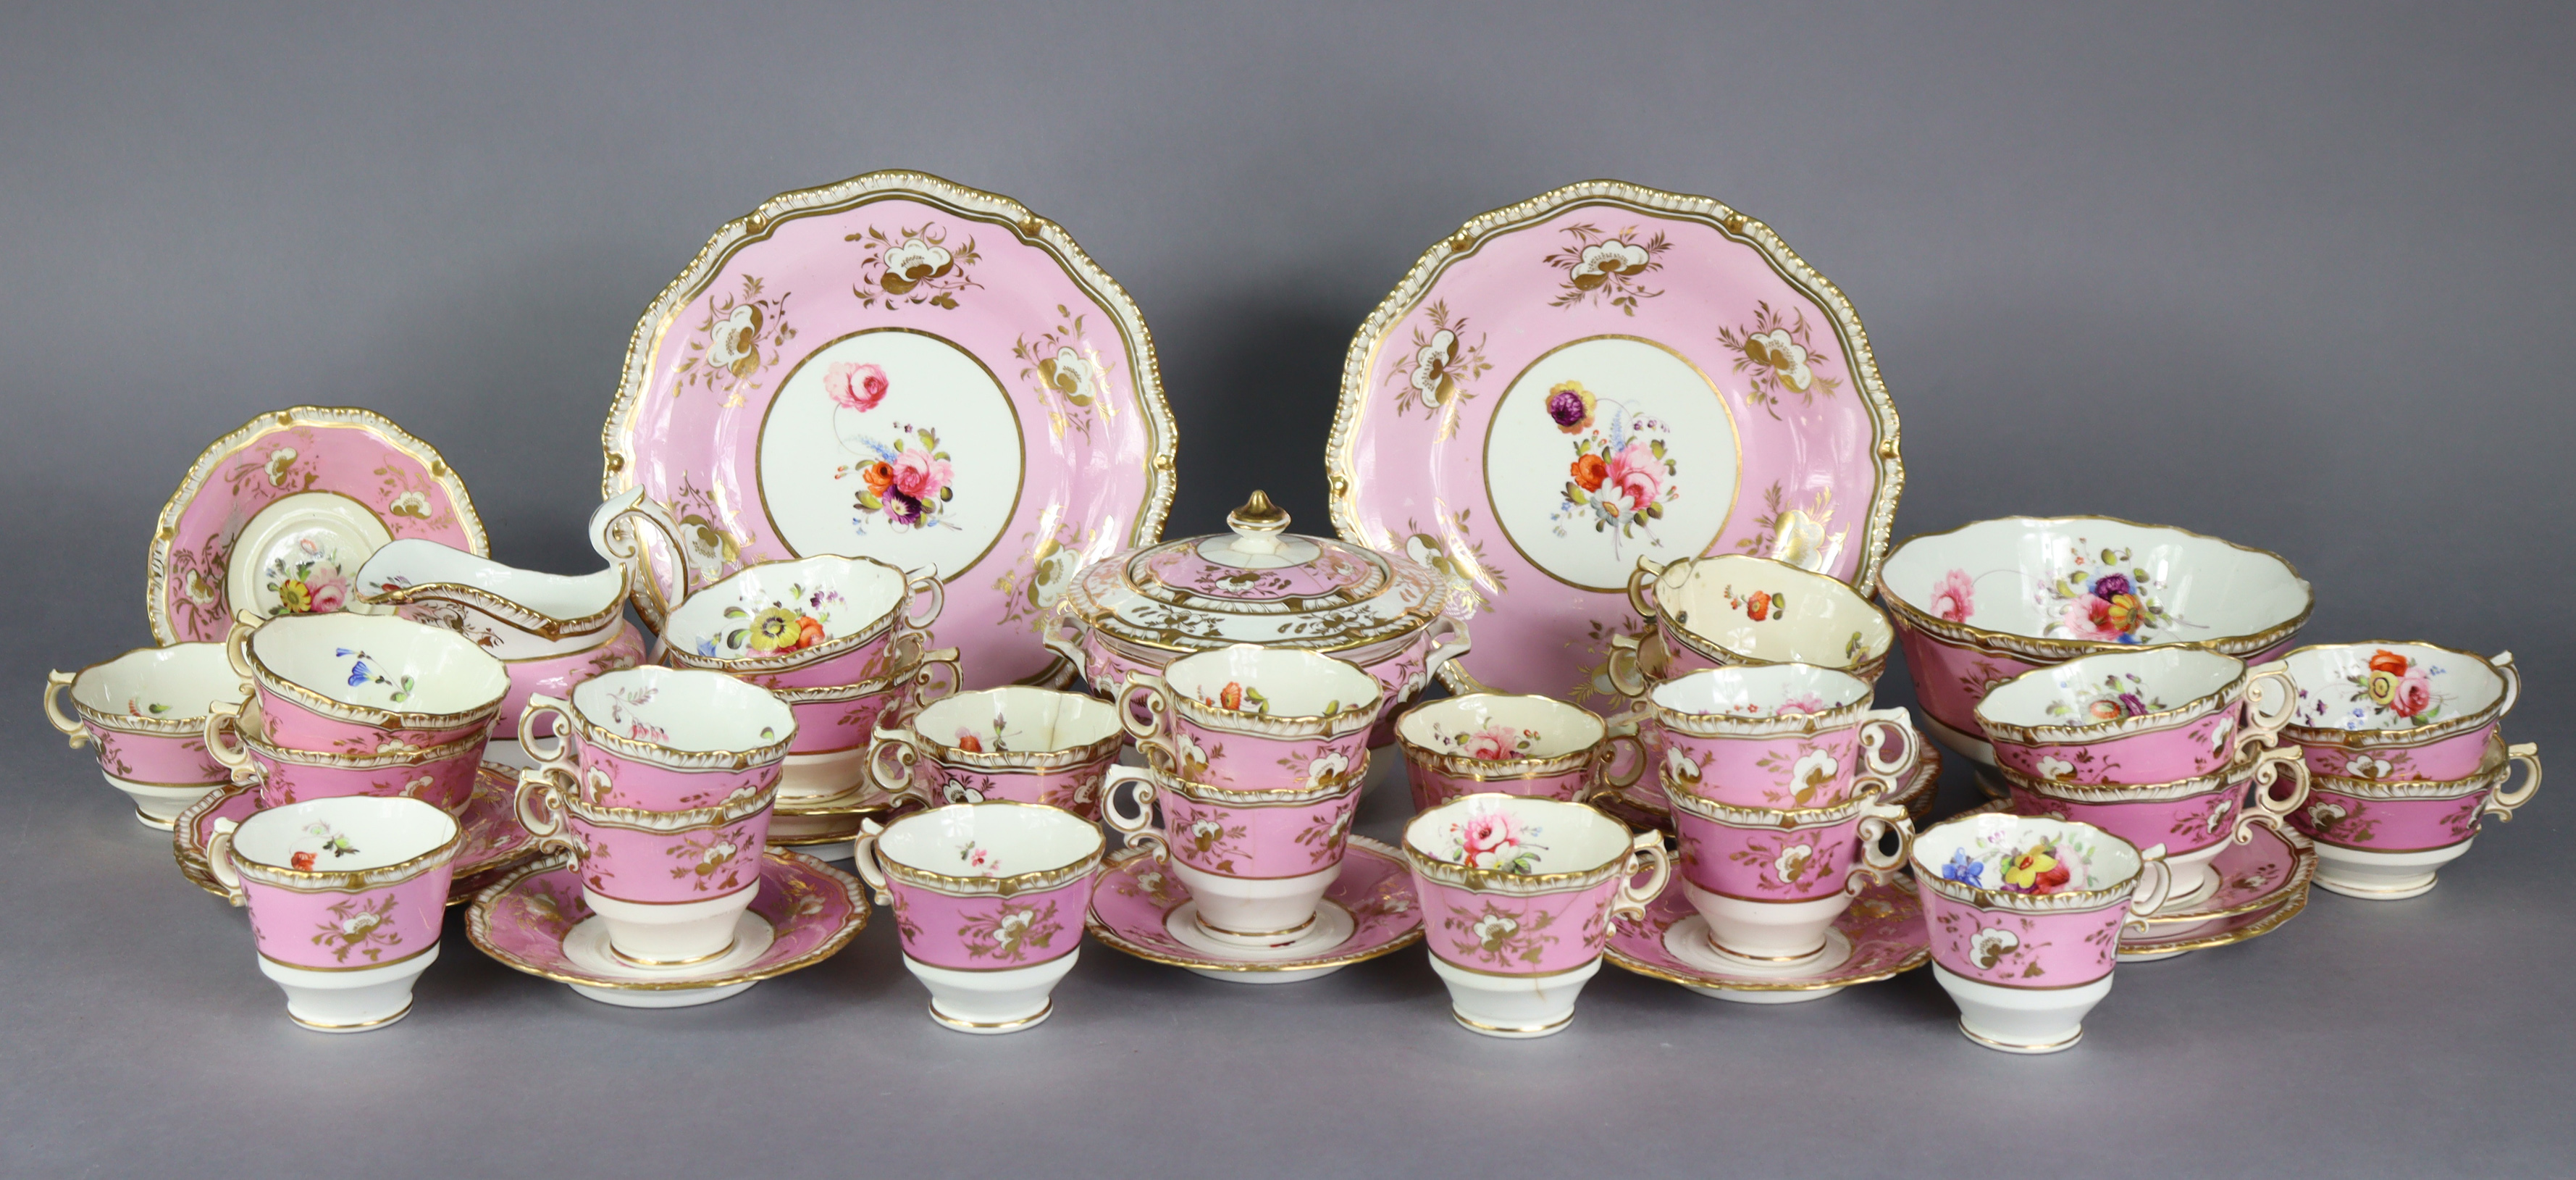 A 19th century English porcelain part tea & coffee service of pink ground with gilt banding & floral